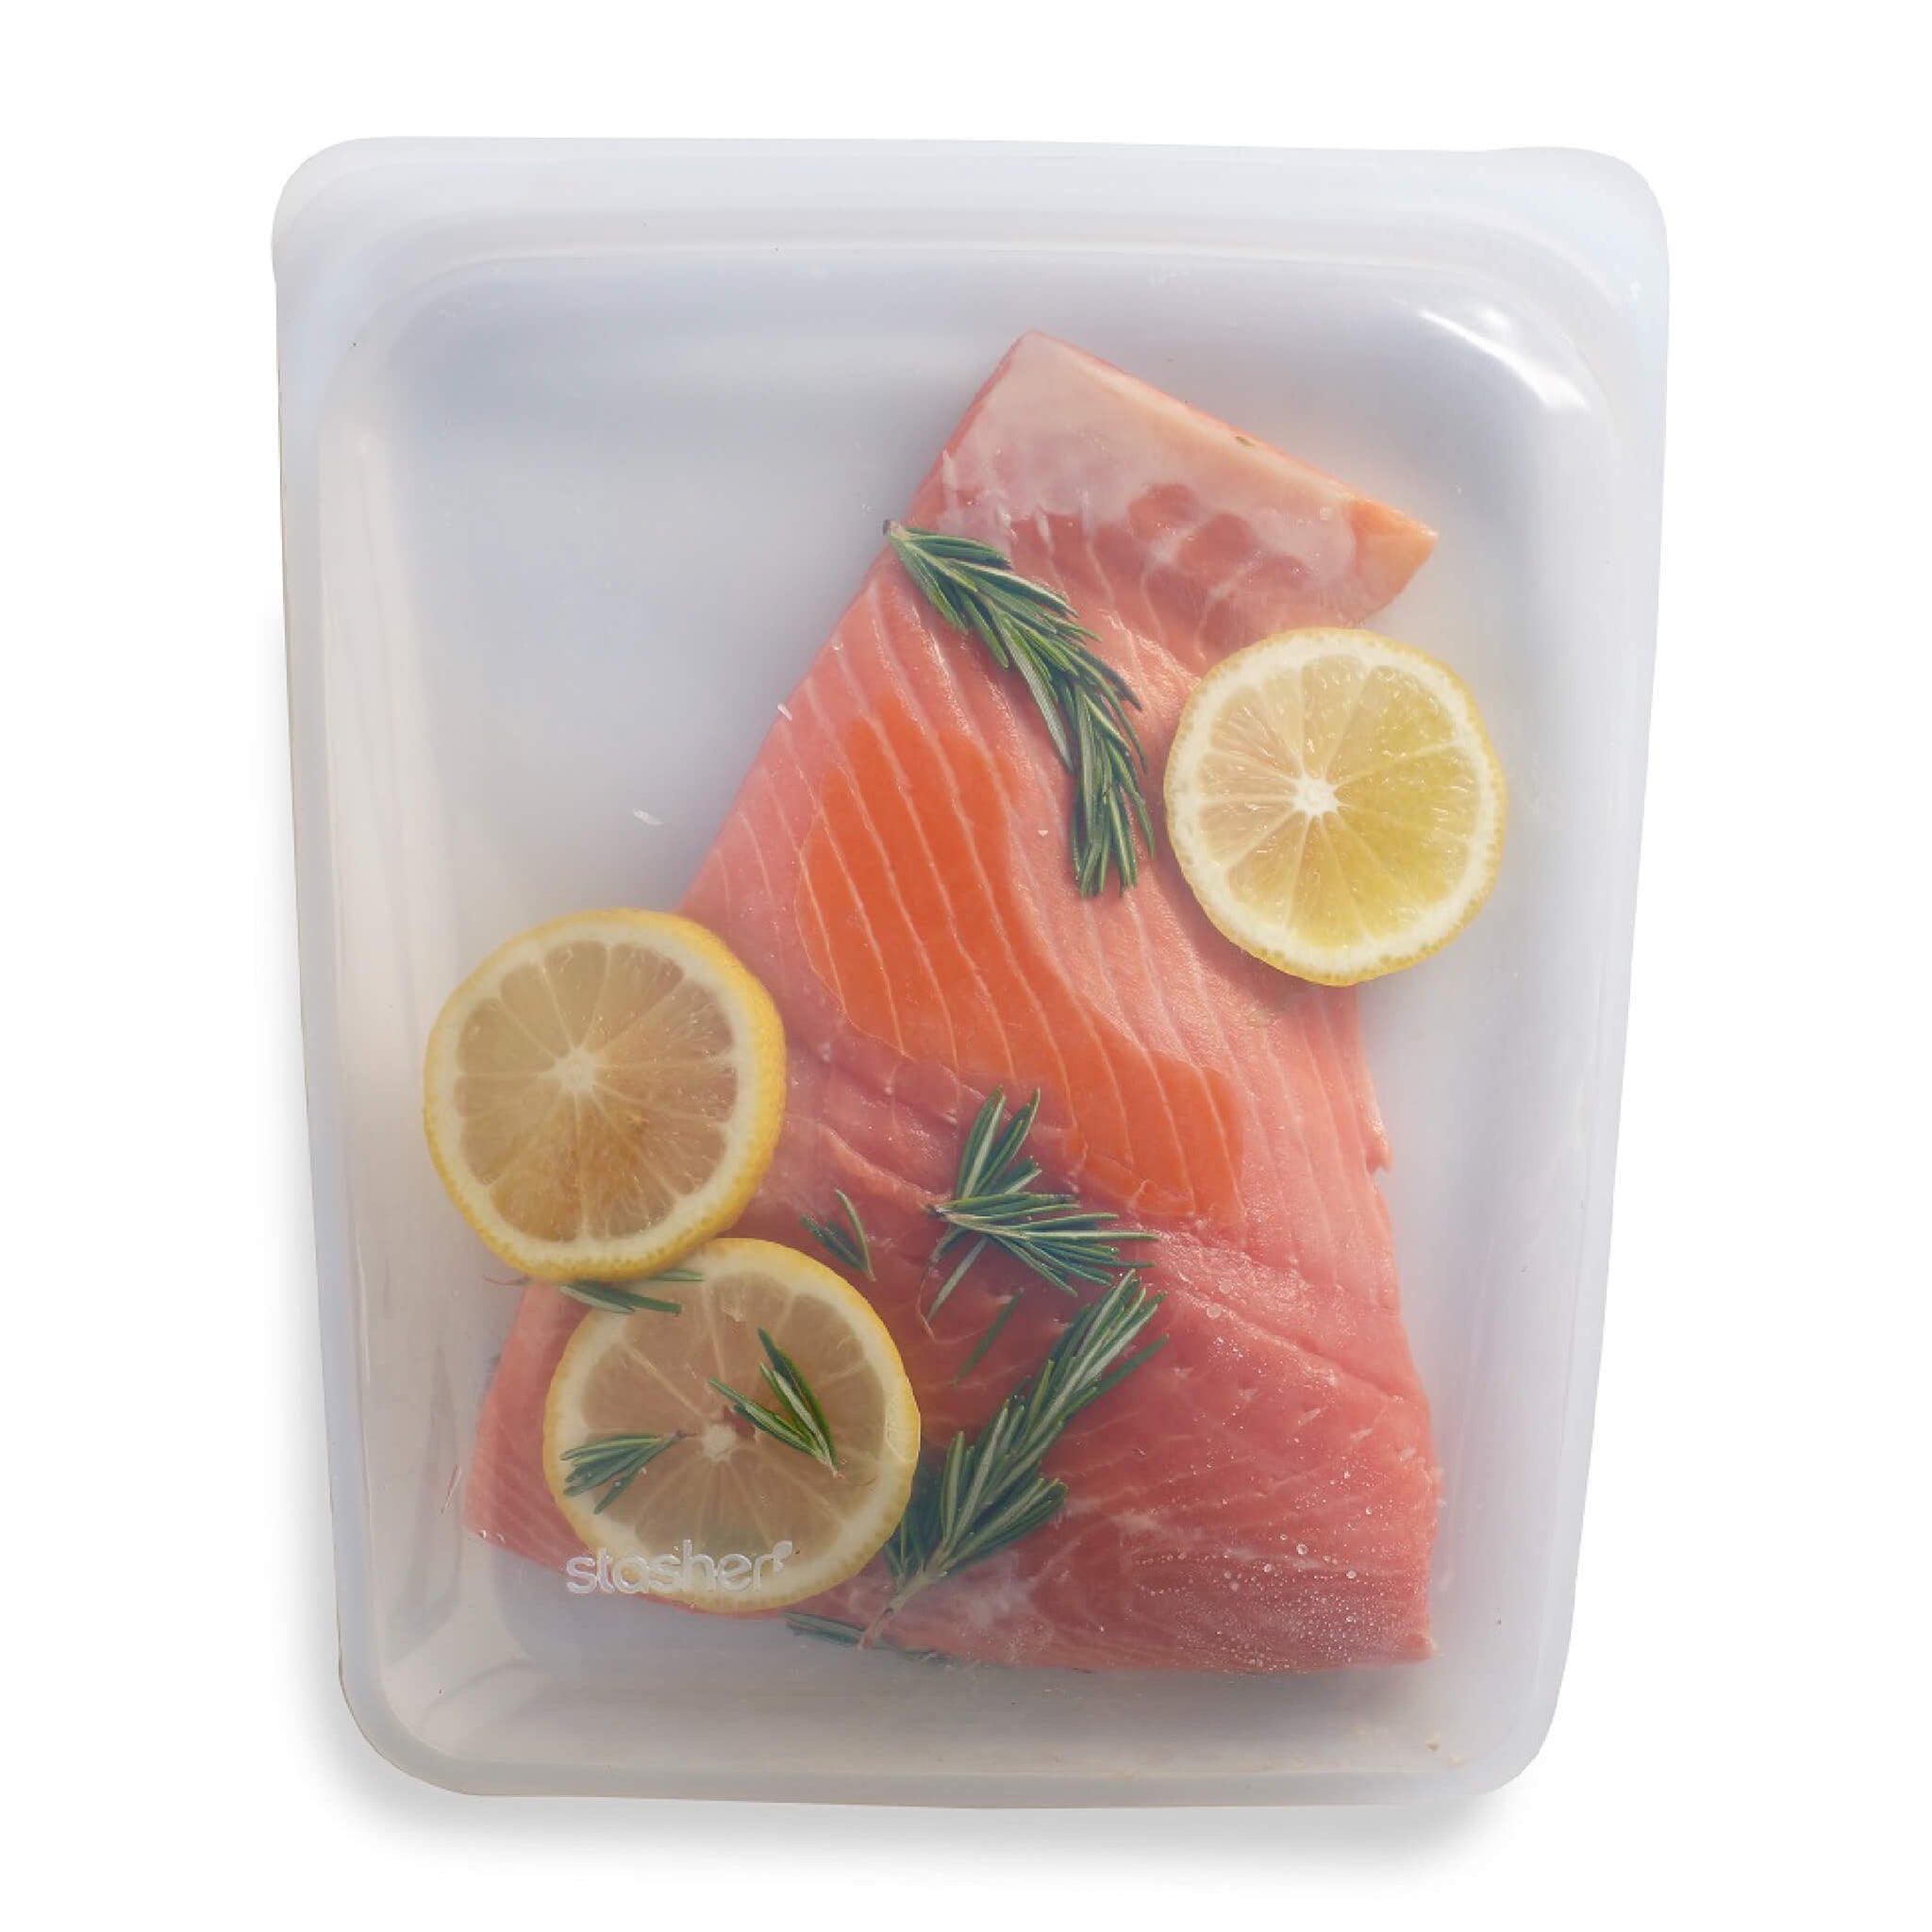 large clear stasher bag with salmon